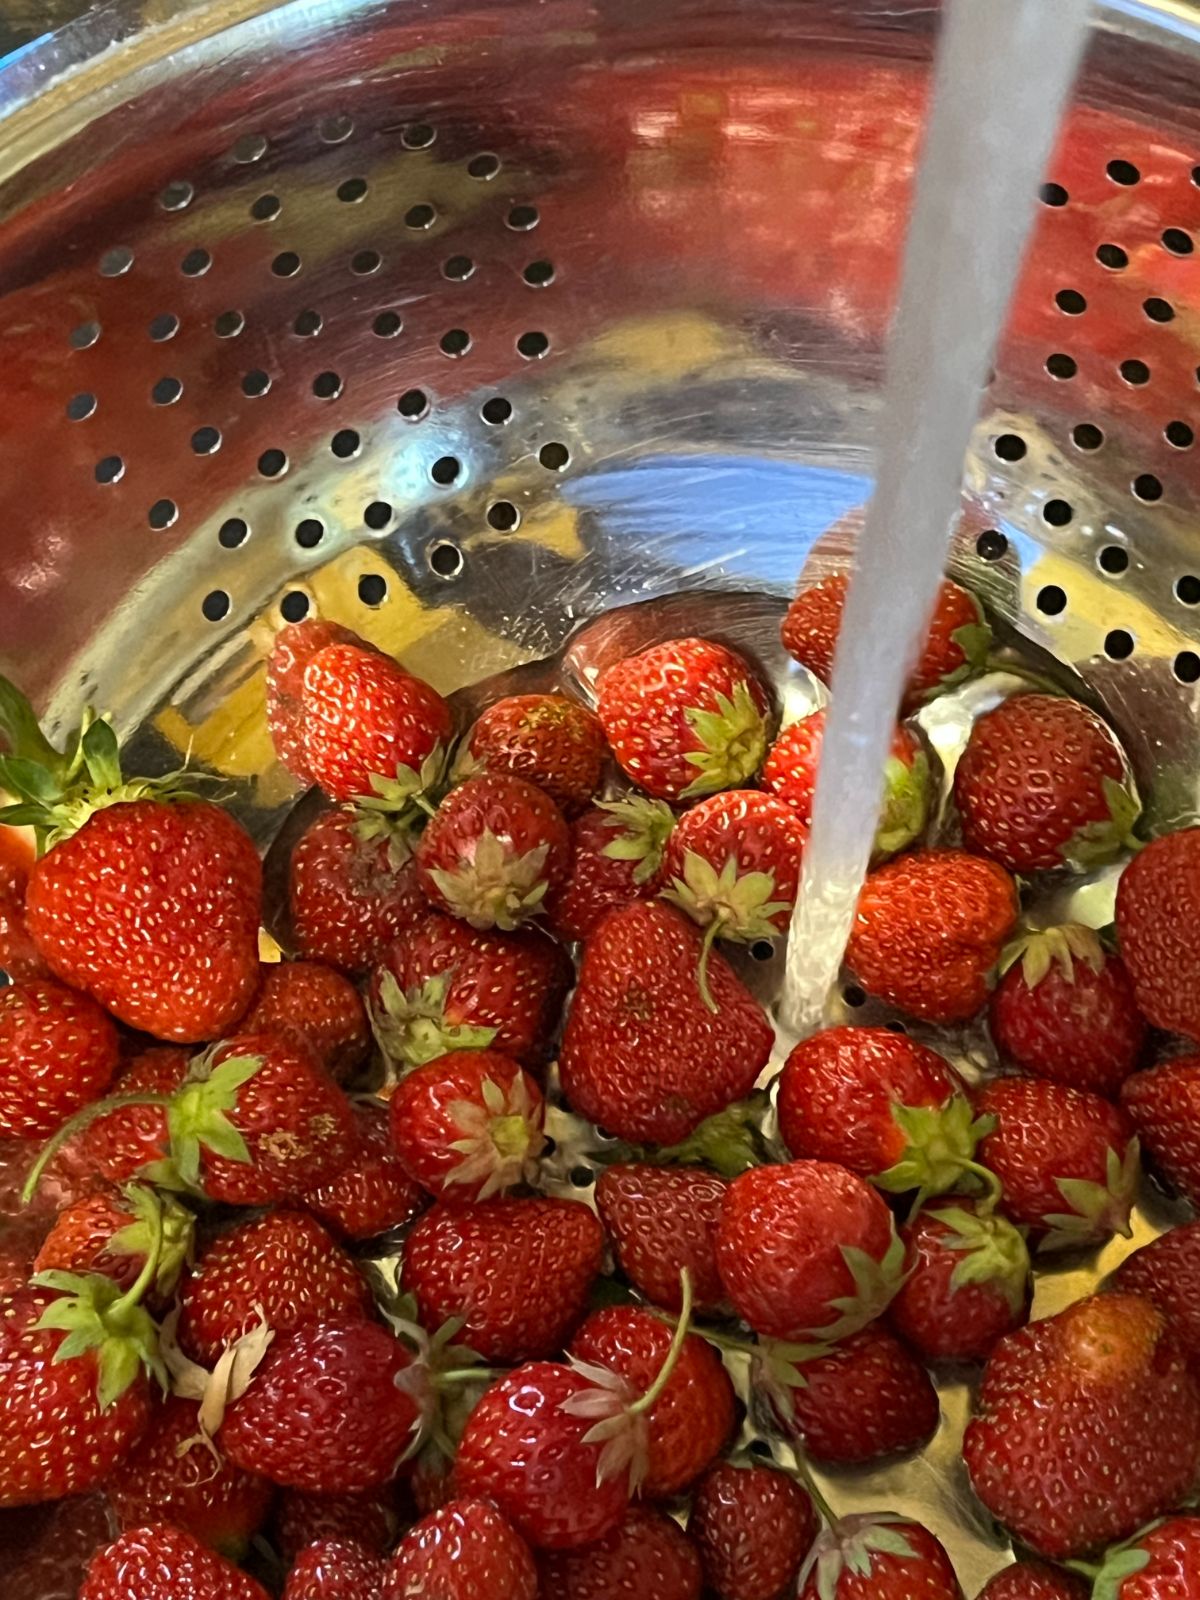 A closeup of strawberries being washed under running water